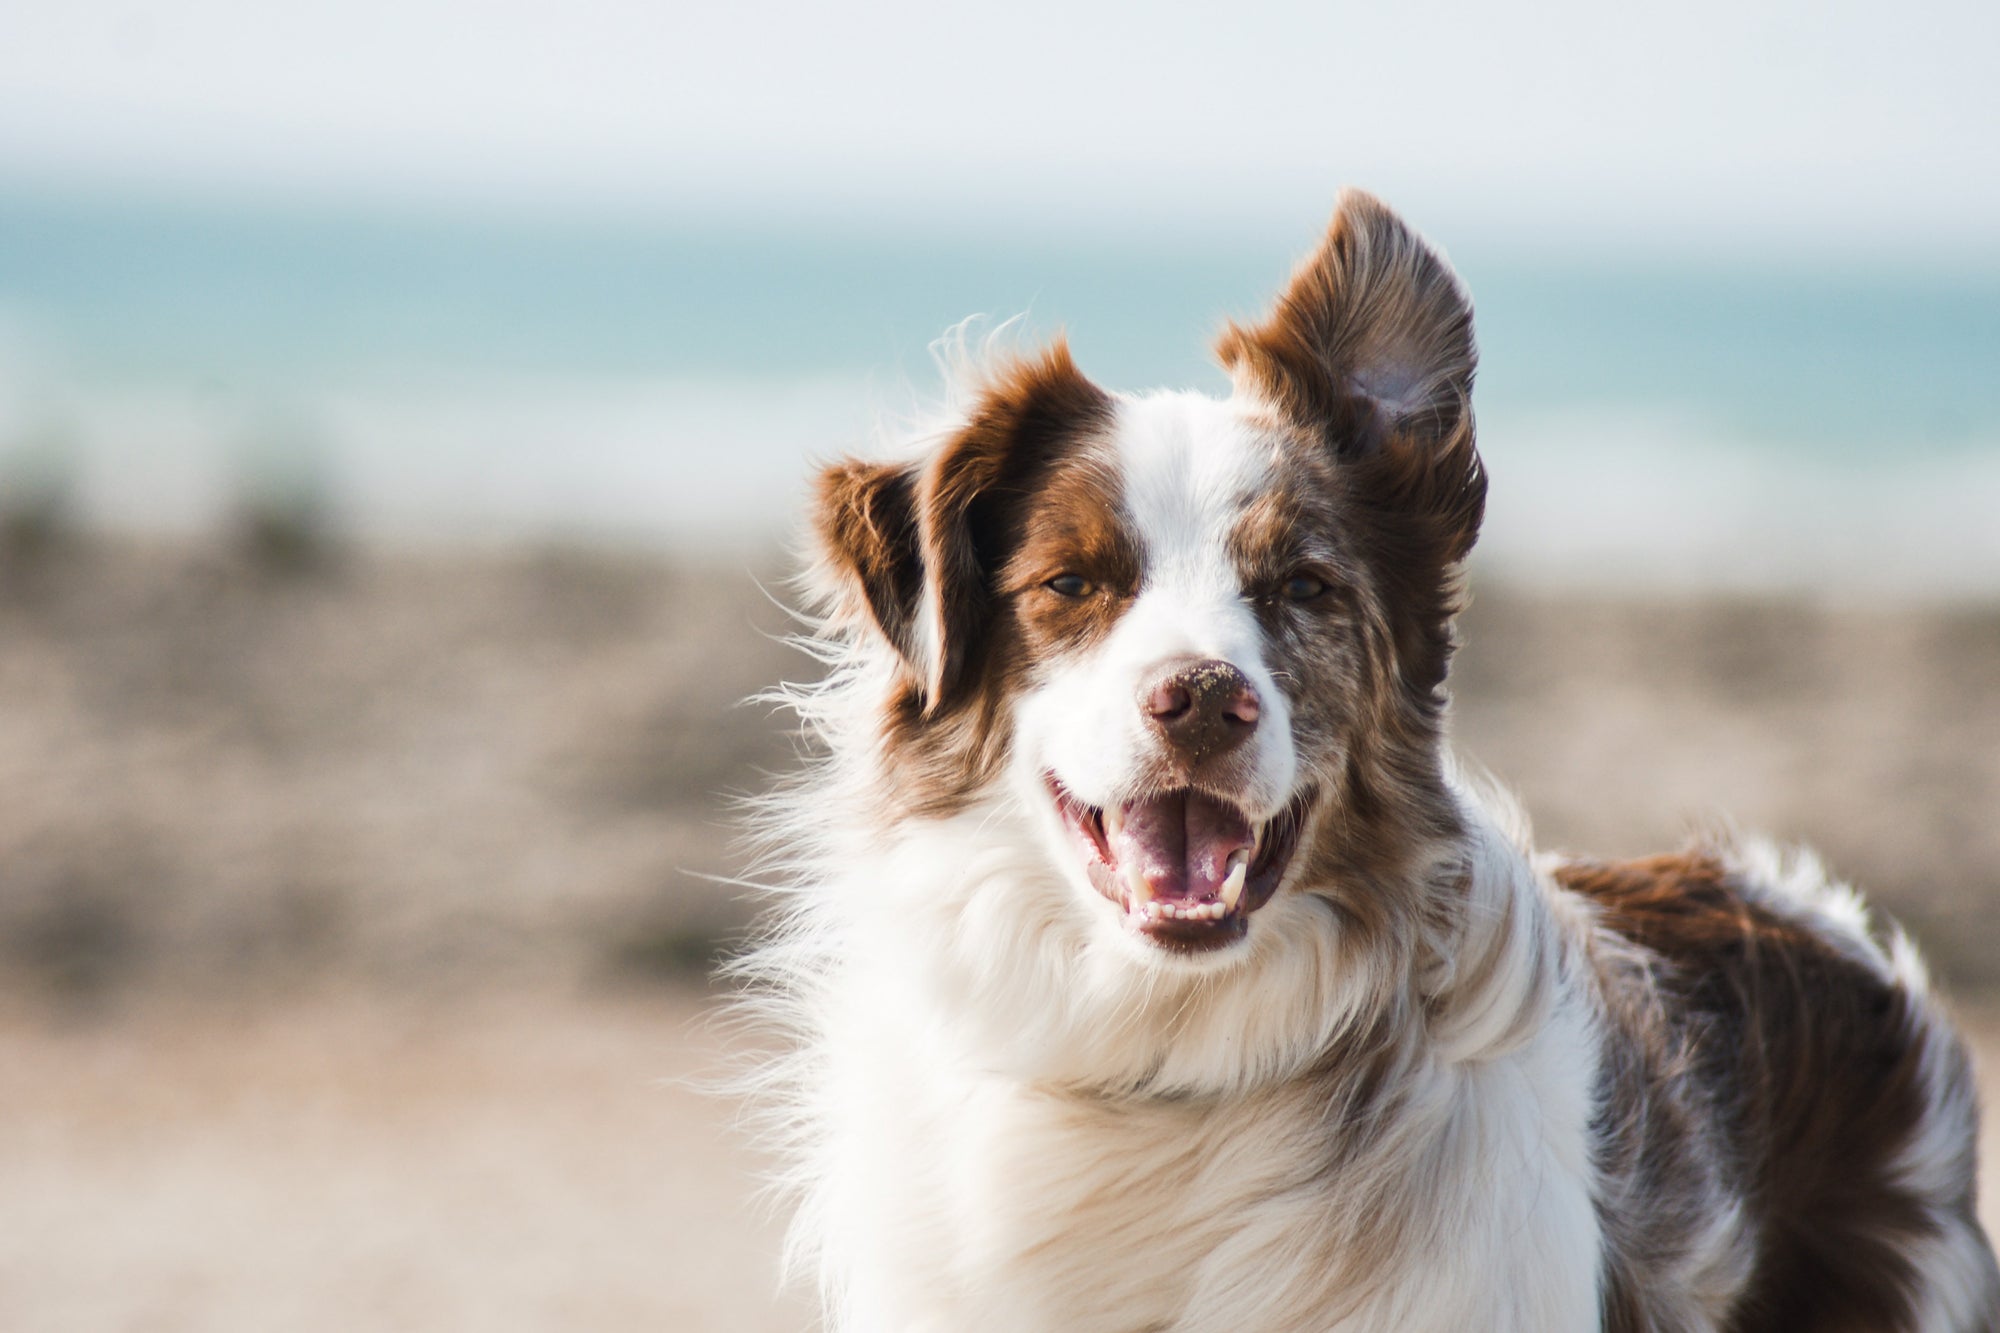 A smiling dog standing on a beach with its fur blowing in the wind.